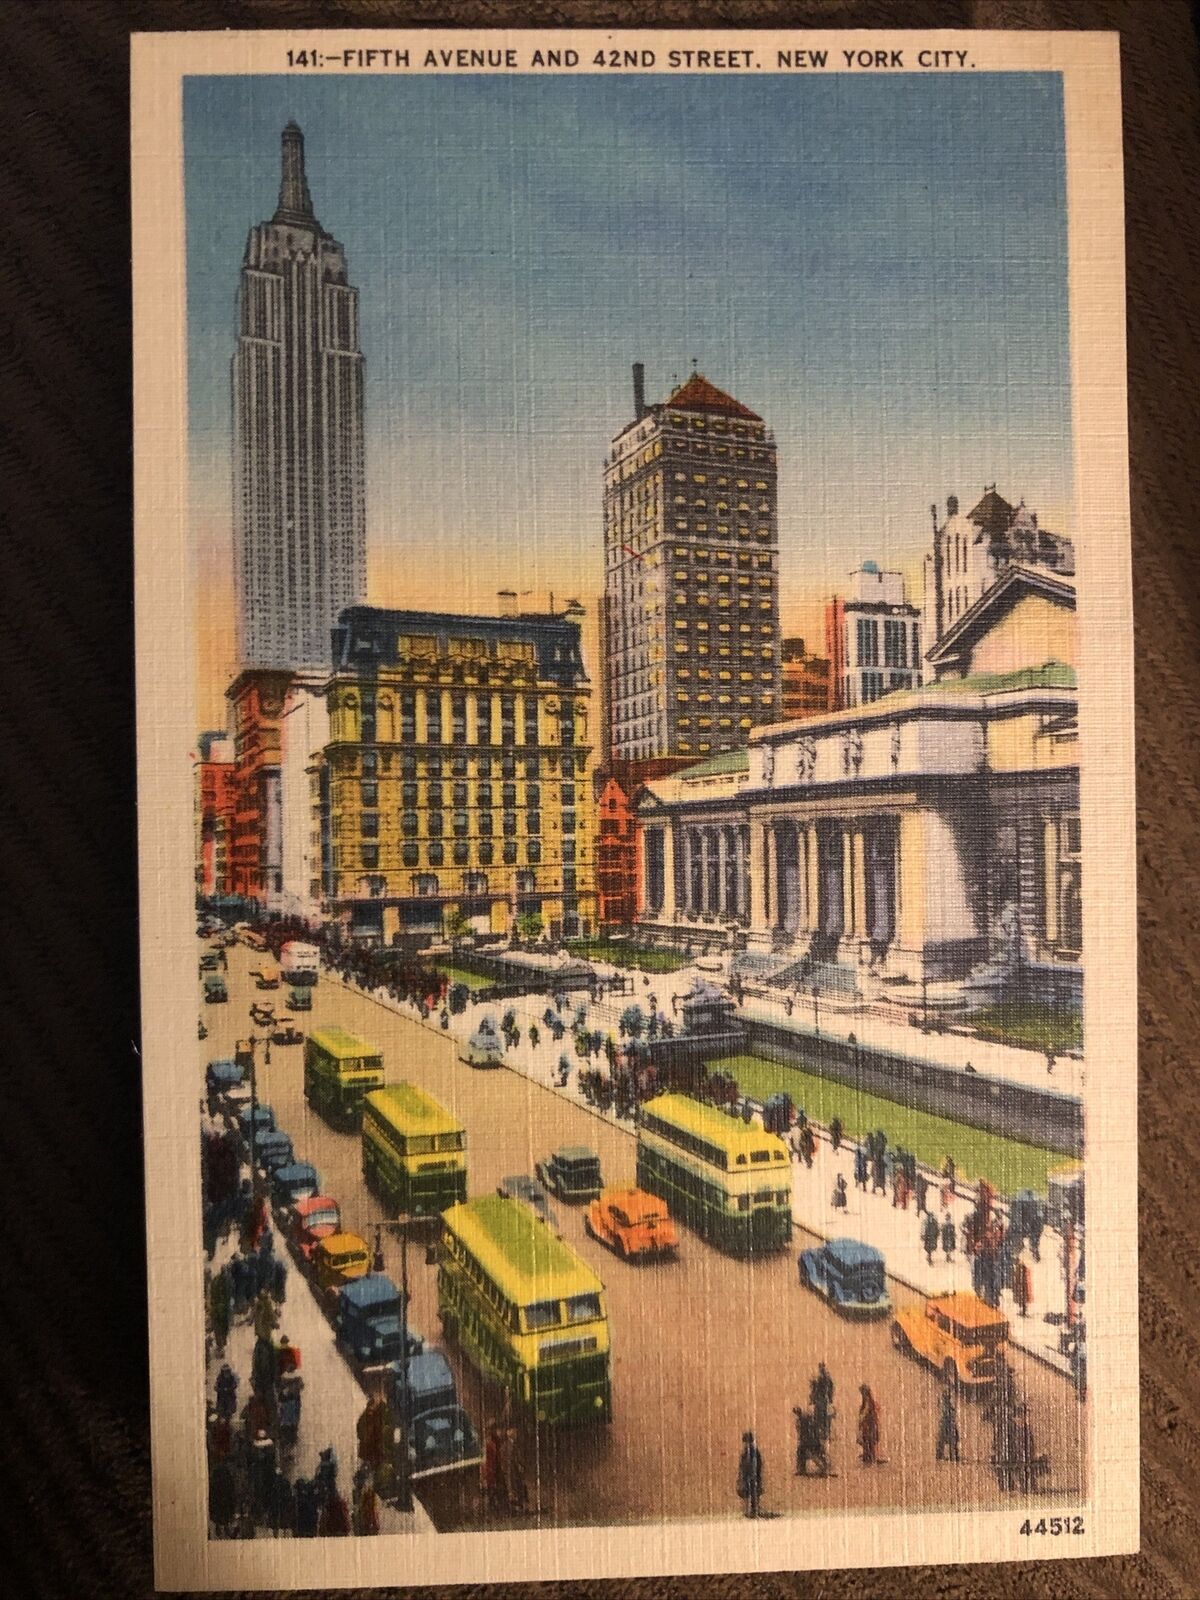 Vintage Linen Postcard Fifth Avenue And 42nd St, New York City, New York. c1930s